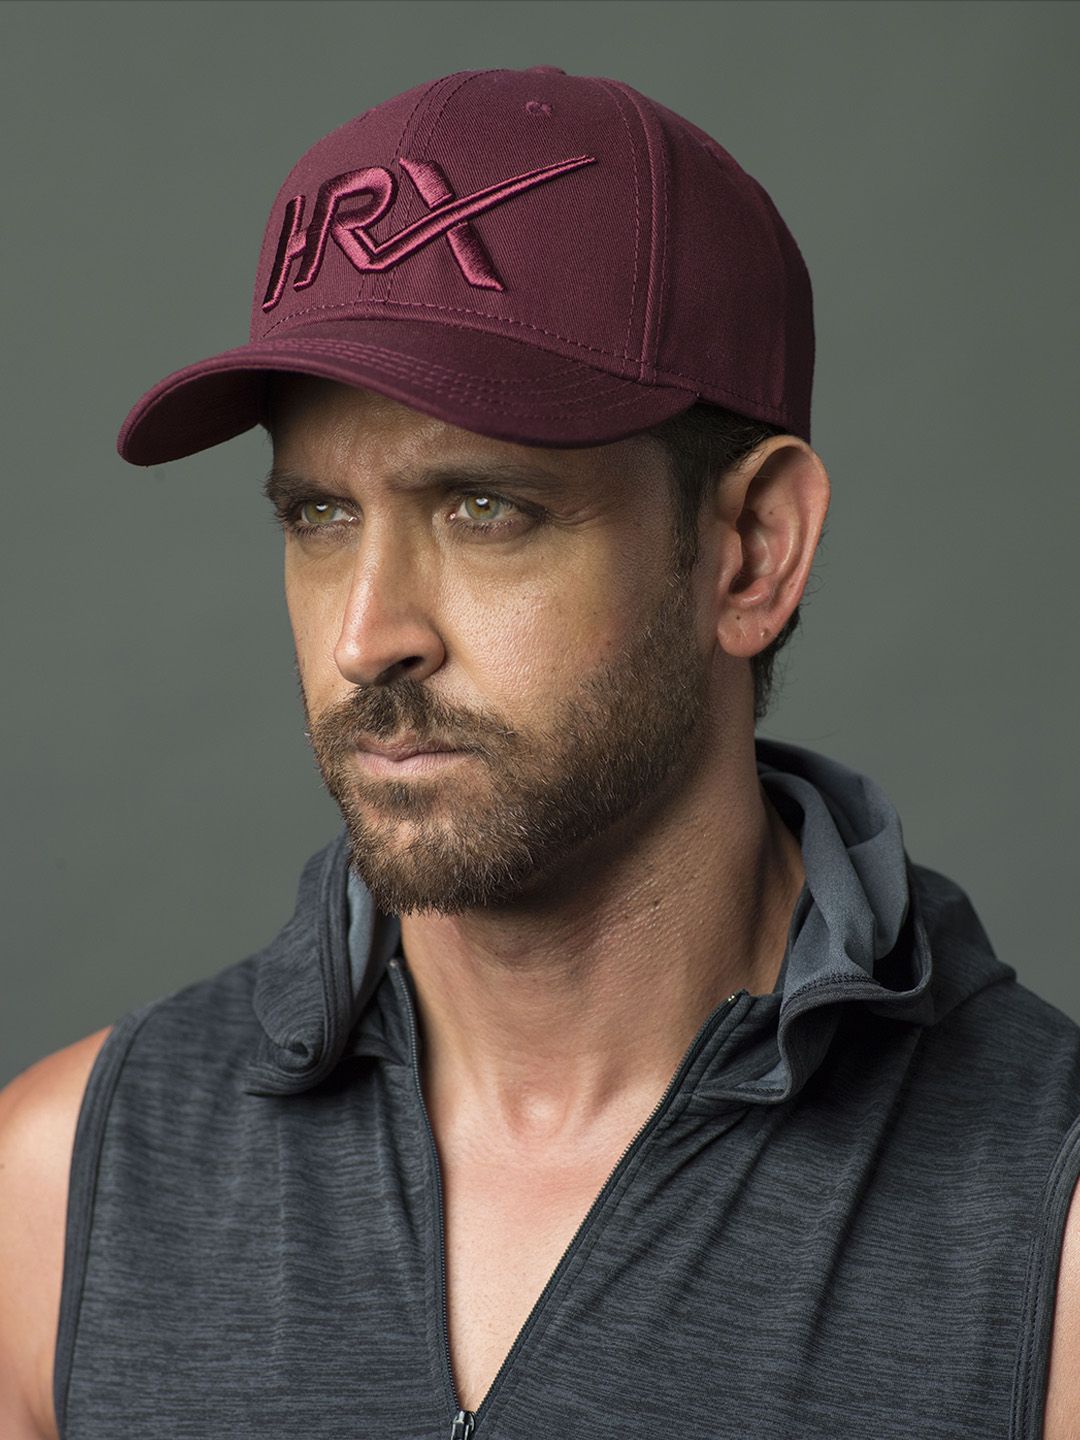 HRX by Hrithik Roshan Unisex Maroon Solid Lifestyle Cap Price in India